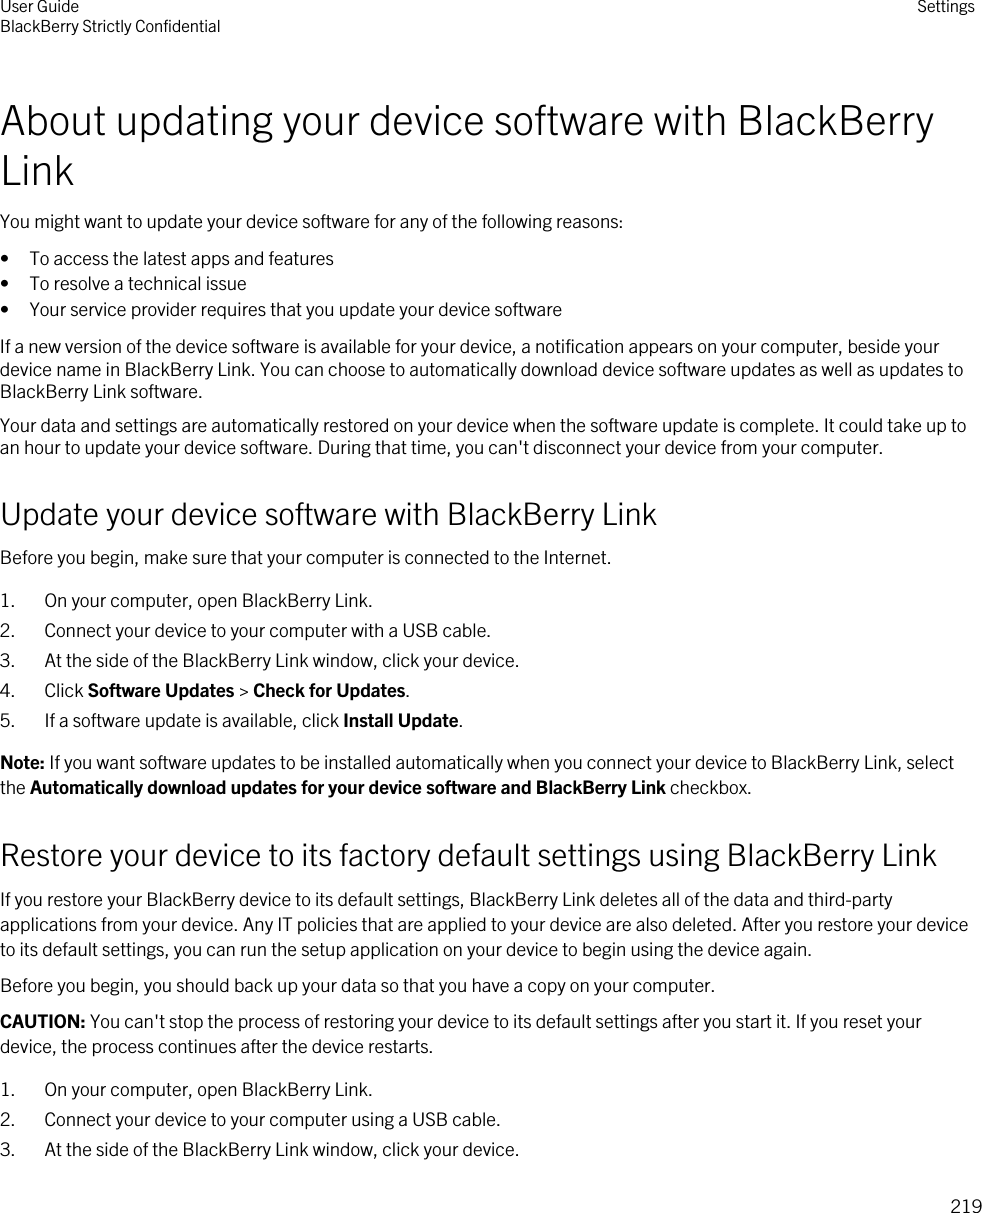 About updating your device software with BlackBerry LinkYou might want to update your device software for any of the following reasons:• To access the latest apps and features• To resolve a technical issue• Your service provider requires that you update your device softwareIf a new version of the device software is available for your device, a notification appears on your computer, beside your device name in BlackBerry Link. You can choose to automatically download device software updates as well as updates to BlackBerry Link software.Your data and settings are automatically restored on your device when the software update is complete. It could take up to an hour to update your device software. During that time, you can&apos;t disconnect your device from your computer.Update your device software with BlackBerry LinkBefore you begin, make sure that your computer is connected to the Internet.1. On your computer, open BlackBerry Link.2. Connect your device to your computer with a USB cable.3. At the side of the BlackBerry Link window, click your device.4. Click Software Updates &gt; Check for Updates.5. If a software update is available, click Install Update.Note: If you want software updates to be installed automatically when you connect your device to BlackBerry Link, select the Automatically download updates for your device software and BlackBerry Link checkbox.Restore your device to its factory default settings using BlackBerry LinkIf you restore your BlackBerry device to its default settings, BlackBerry Link deletes all of the data and third-party applications from your device. Any IT policies that are applied to your device are also deleted. After you restore your device to its default settings, you can run the setup application on your device to begin using the device again.Before you begin, you should back up your data so that you have a copy on your computer.CAUTION: You can&apos;t stop the process of restoring your device to its default settings after you start it. If you reset your device, the process continues after the device restarts.1. On your computer, open BlackBerry Link.2. Connect your device to your computer using a USB cable.3. At the side of the BlackBerry Link window, click your device.User GuideBlackBerry Strictly Confidential Settings219